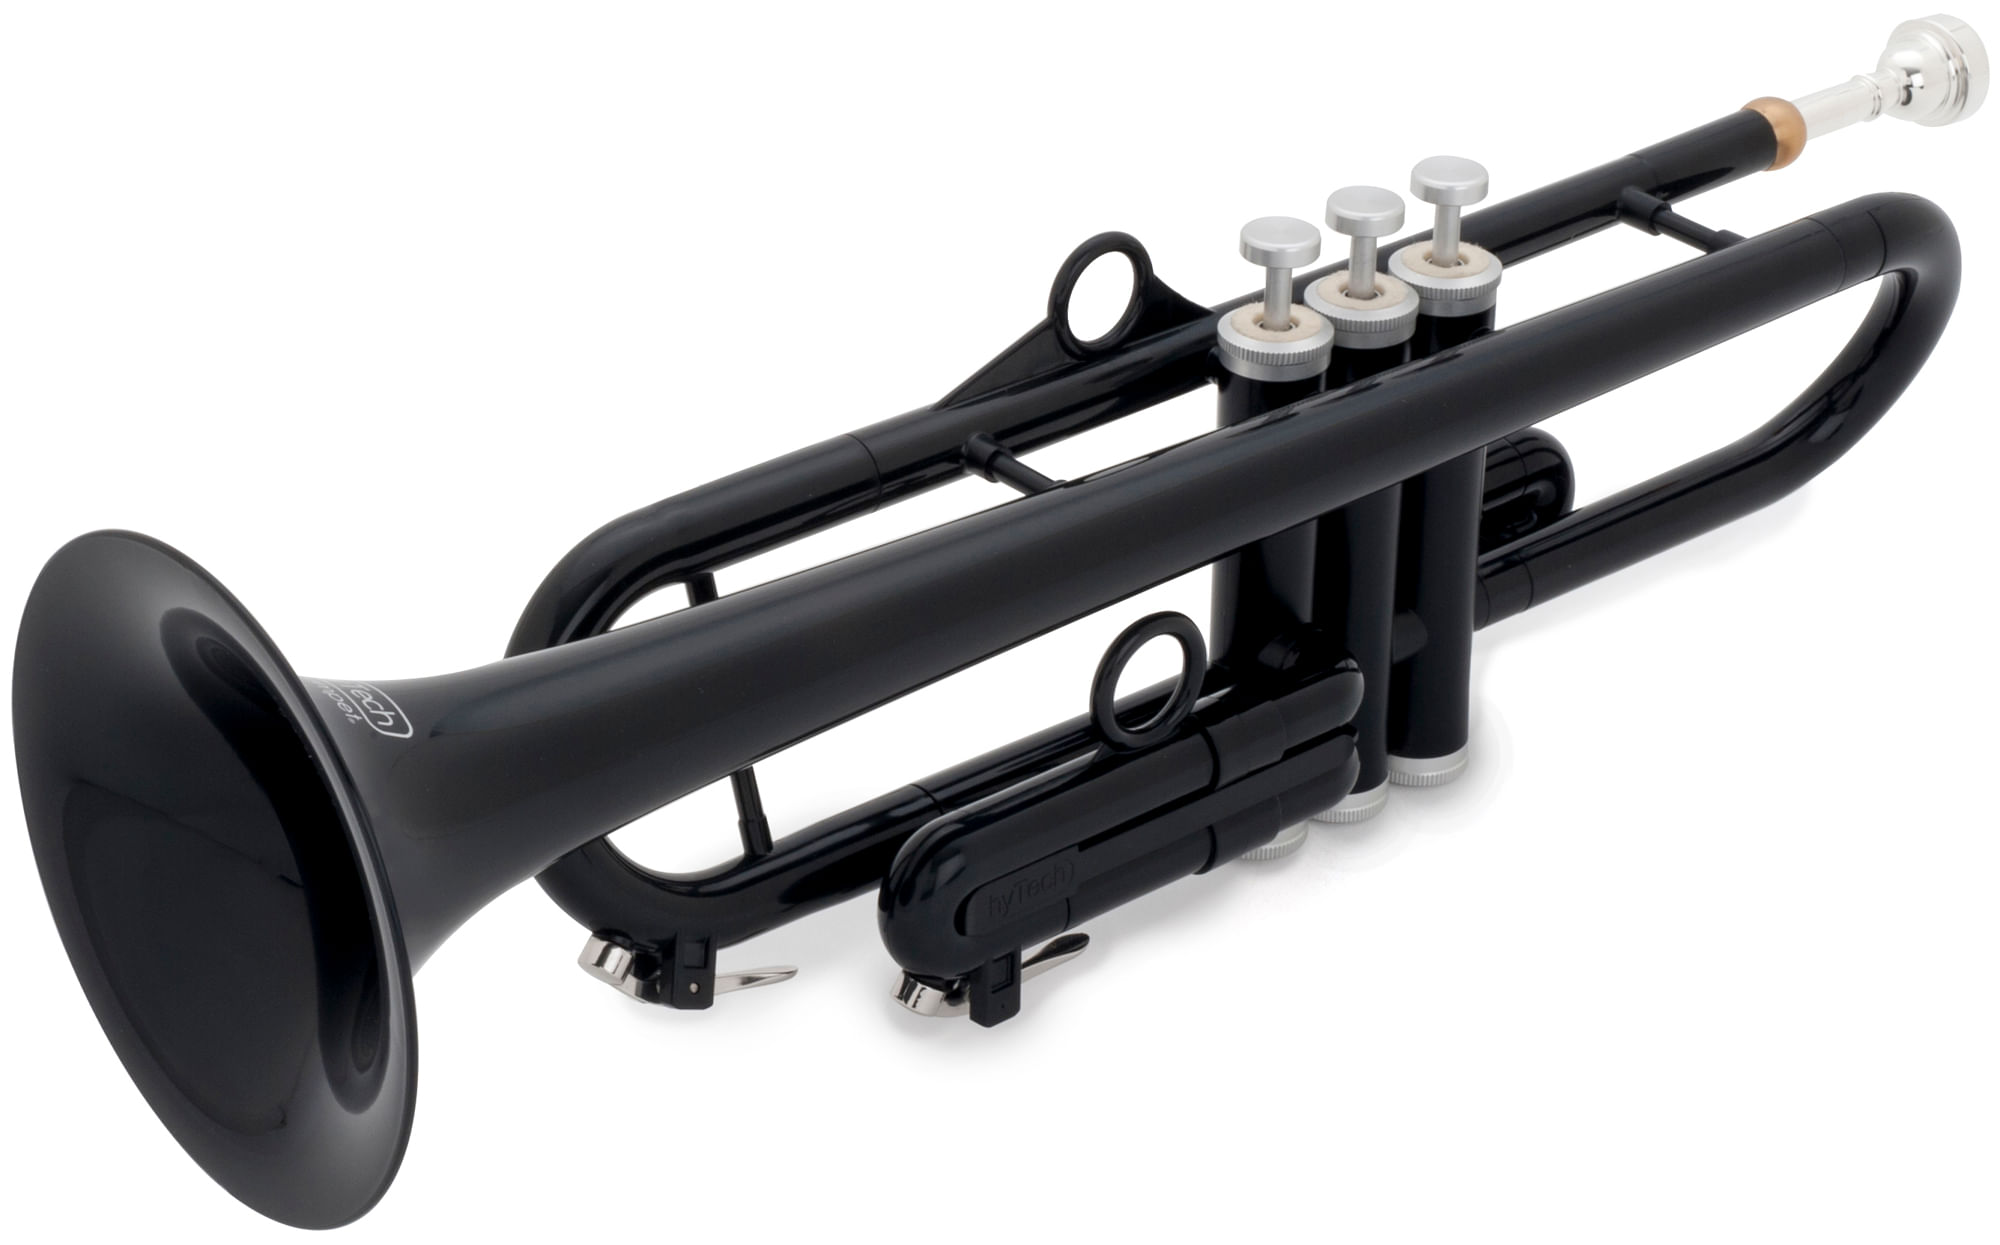 View larger image of pInstruments Bb Trumpet by hyTech - Black